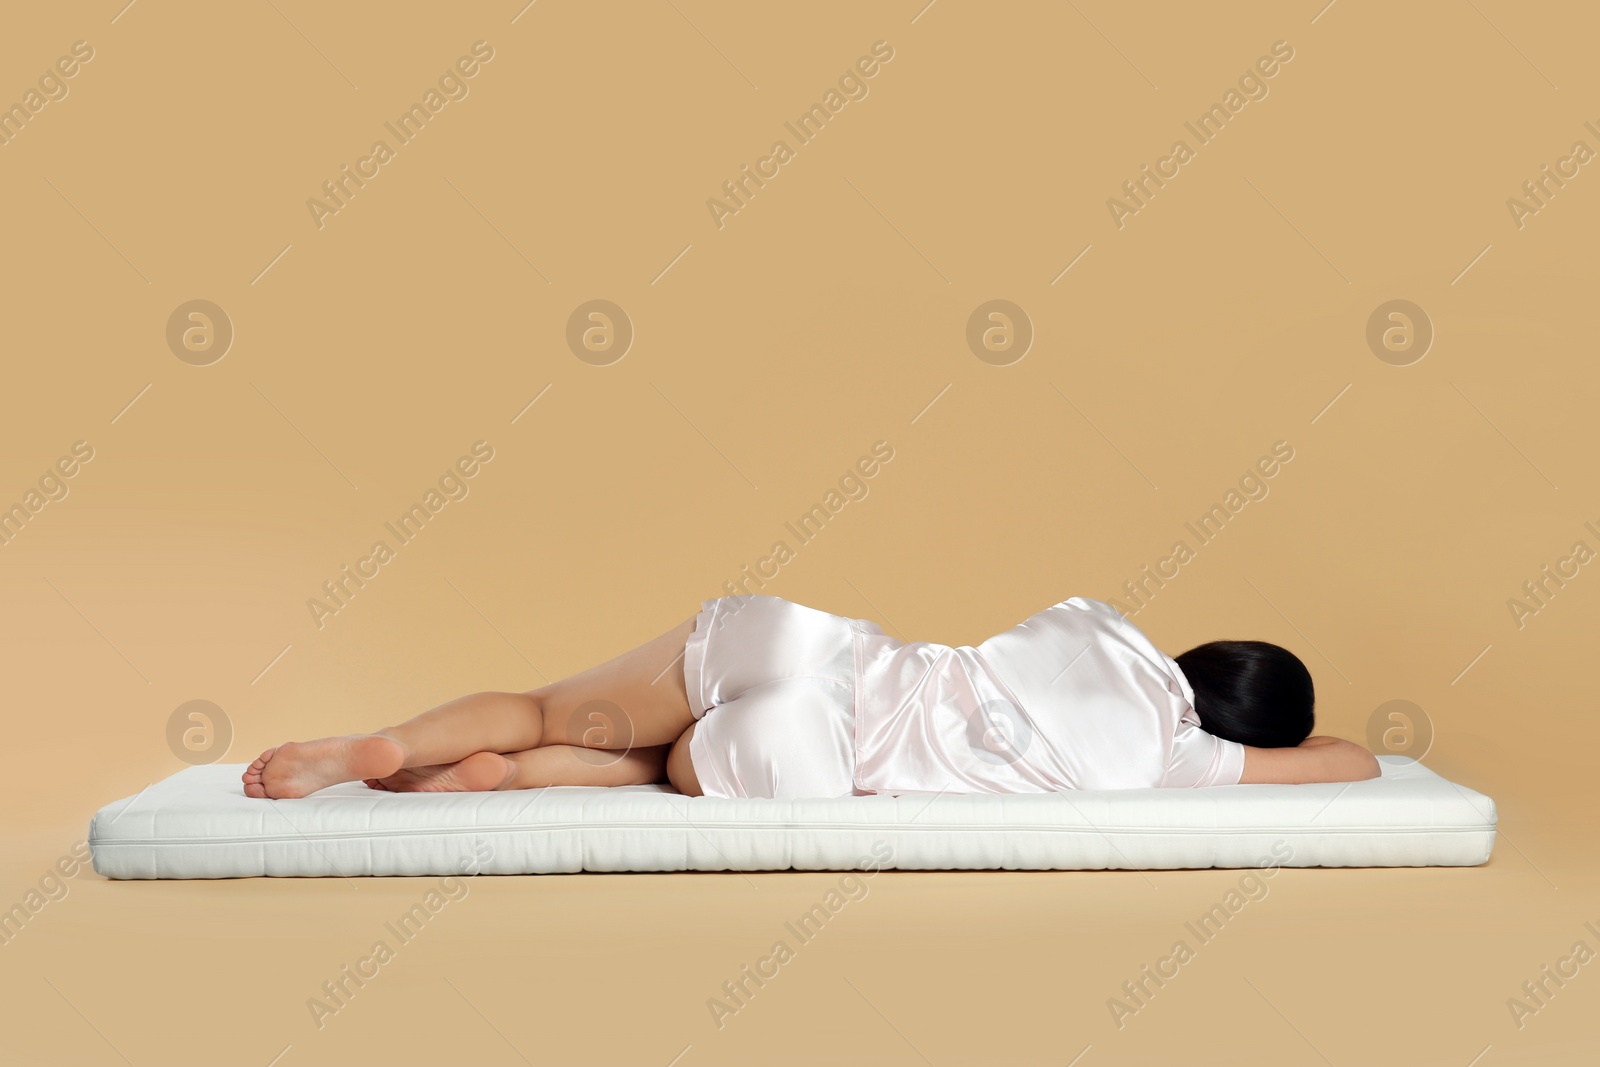 Photo of Young woman lying on soft mattress against beige background, back view